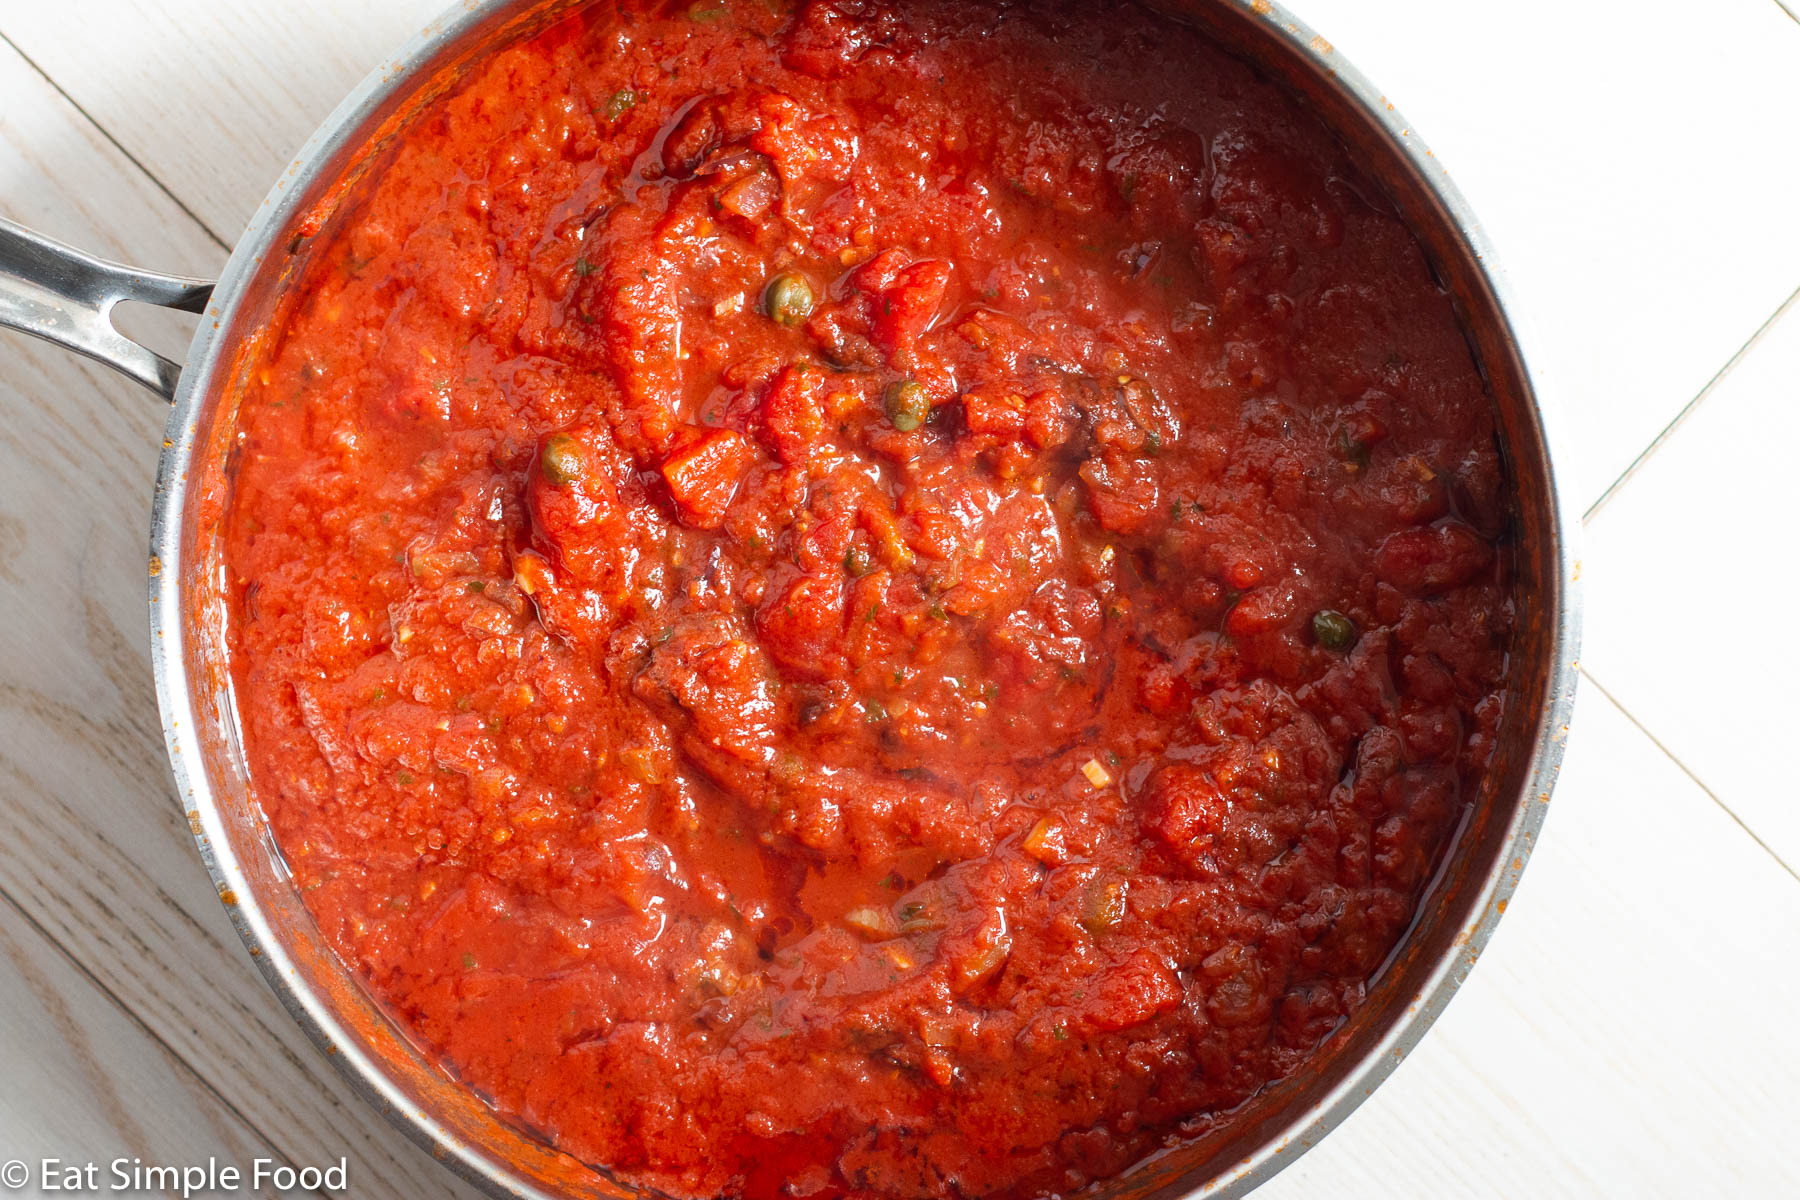 Deep stainless steel pan with a red tomato sauce with onions, garlic, and capers.